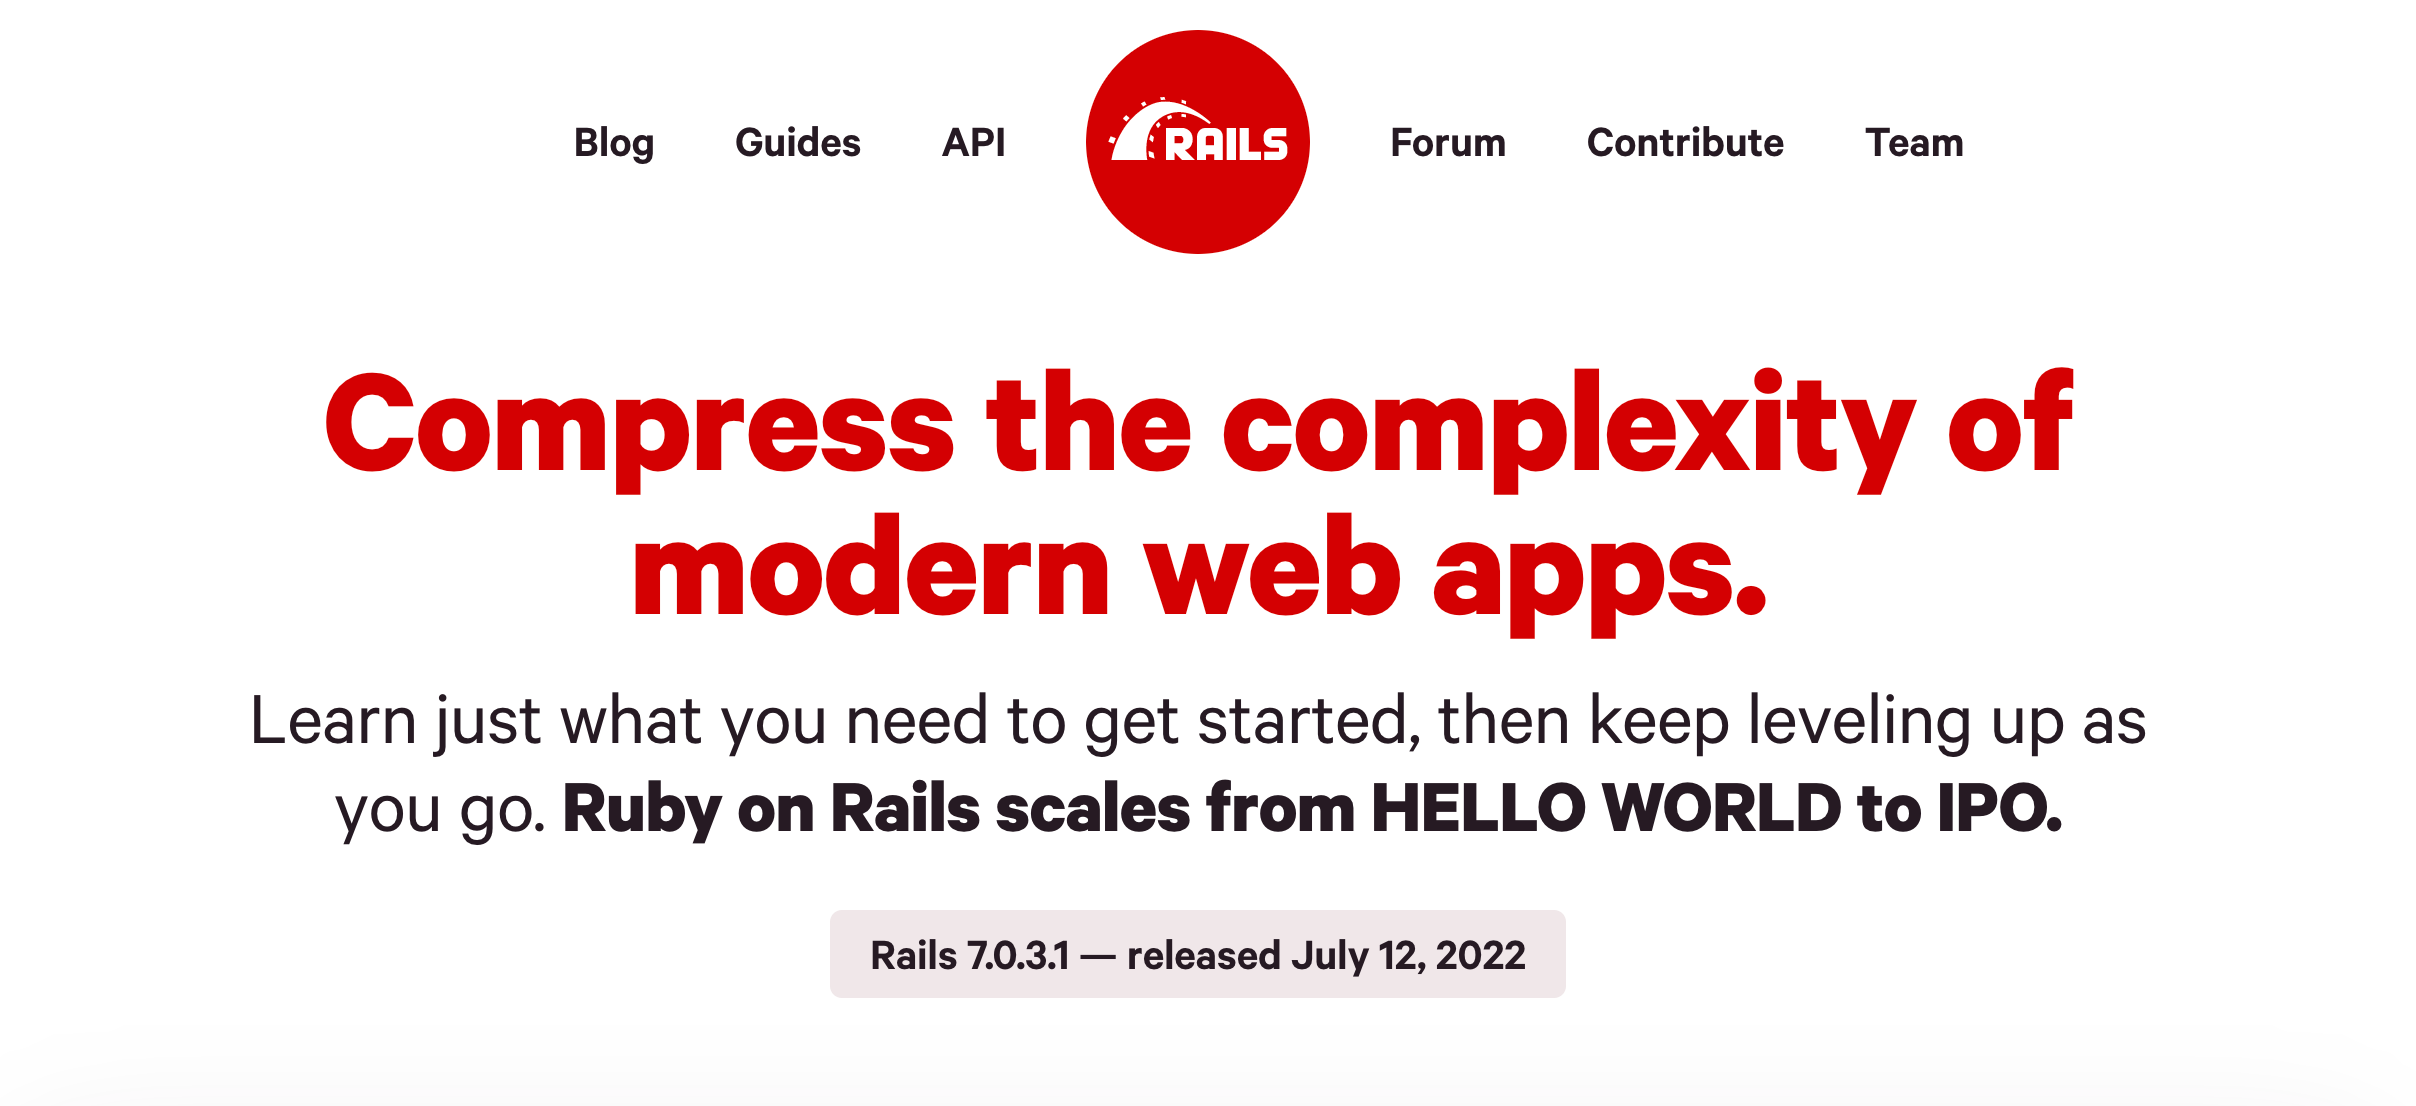 I quit programming 3 years ago. But DHH's promise of Rails makes me want to get back to it.